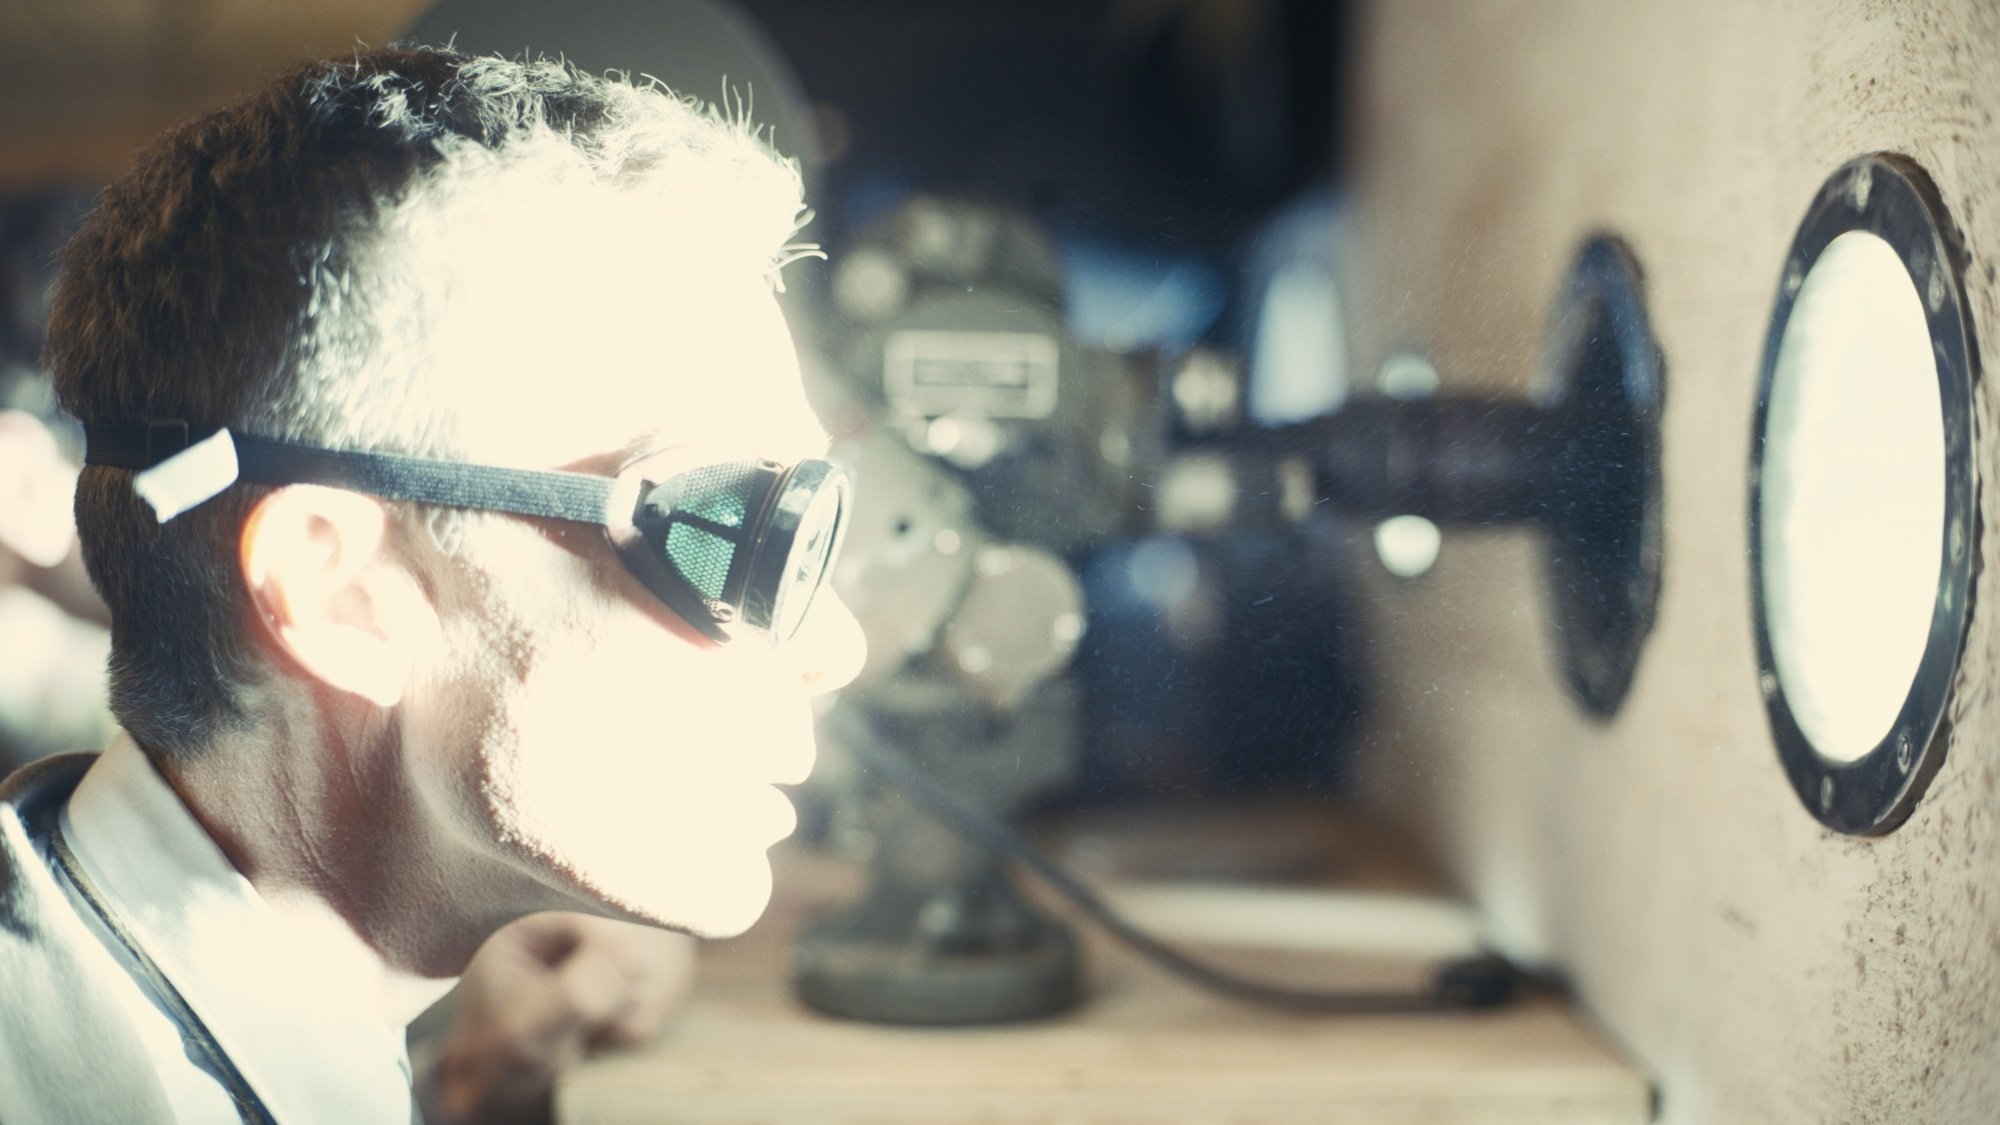 A man in goggles stares out a circular window, bathed in brilliant white light from an explosion.